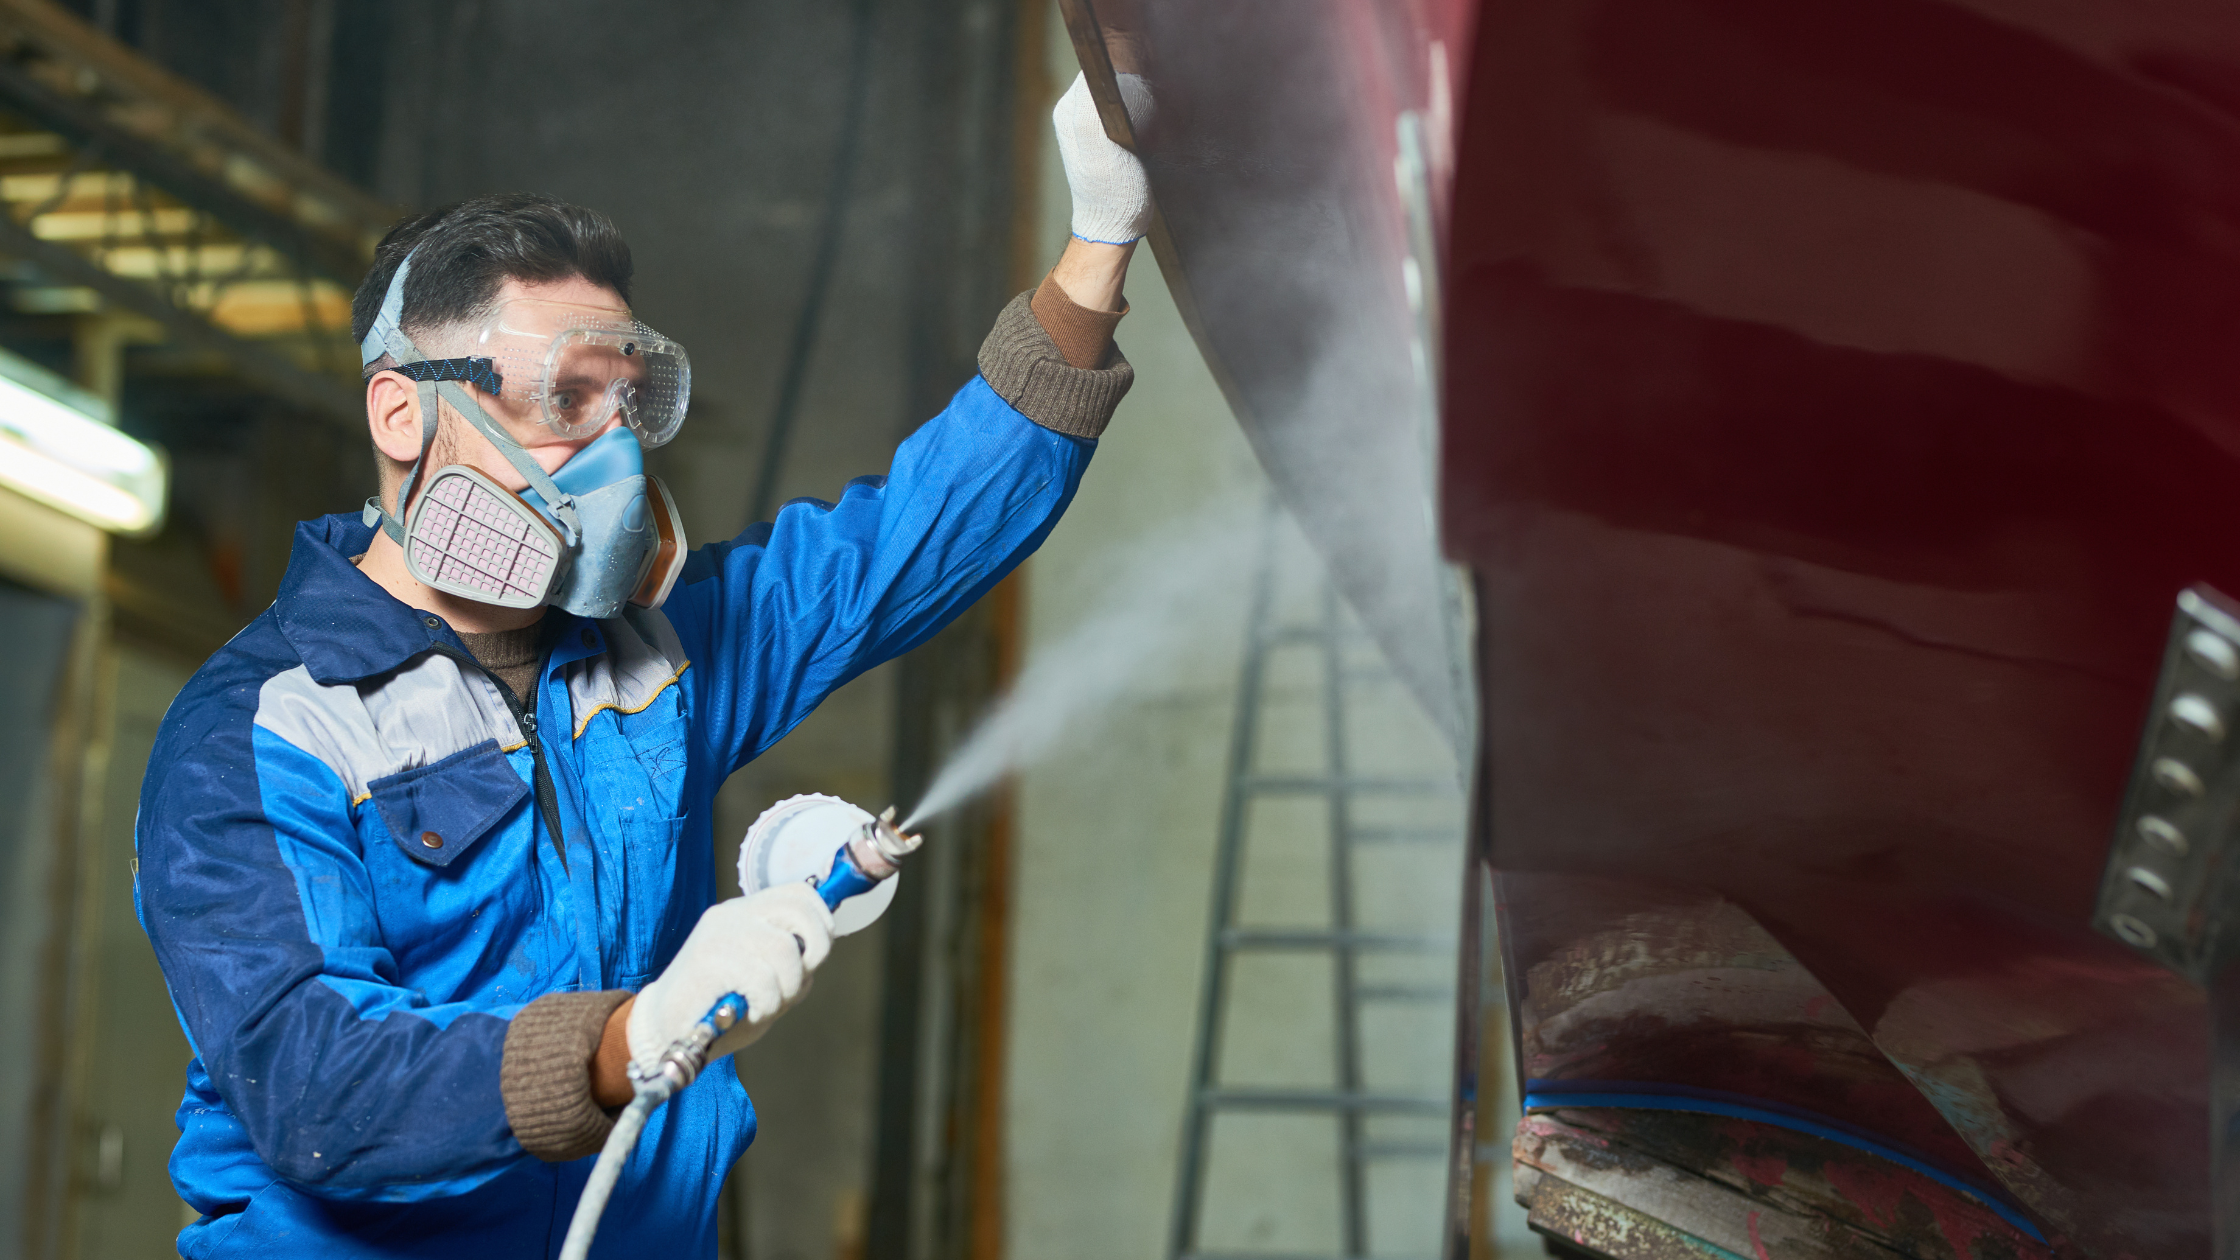 Safety Considerations When Using Spray Paint